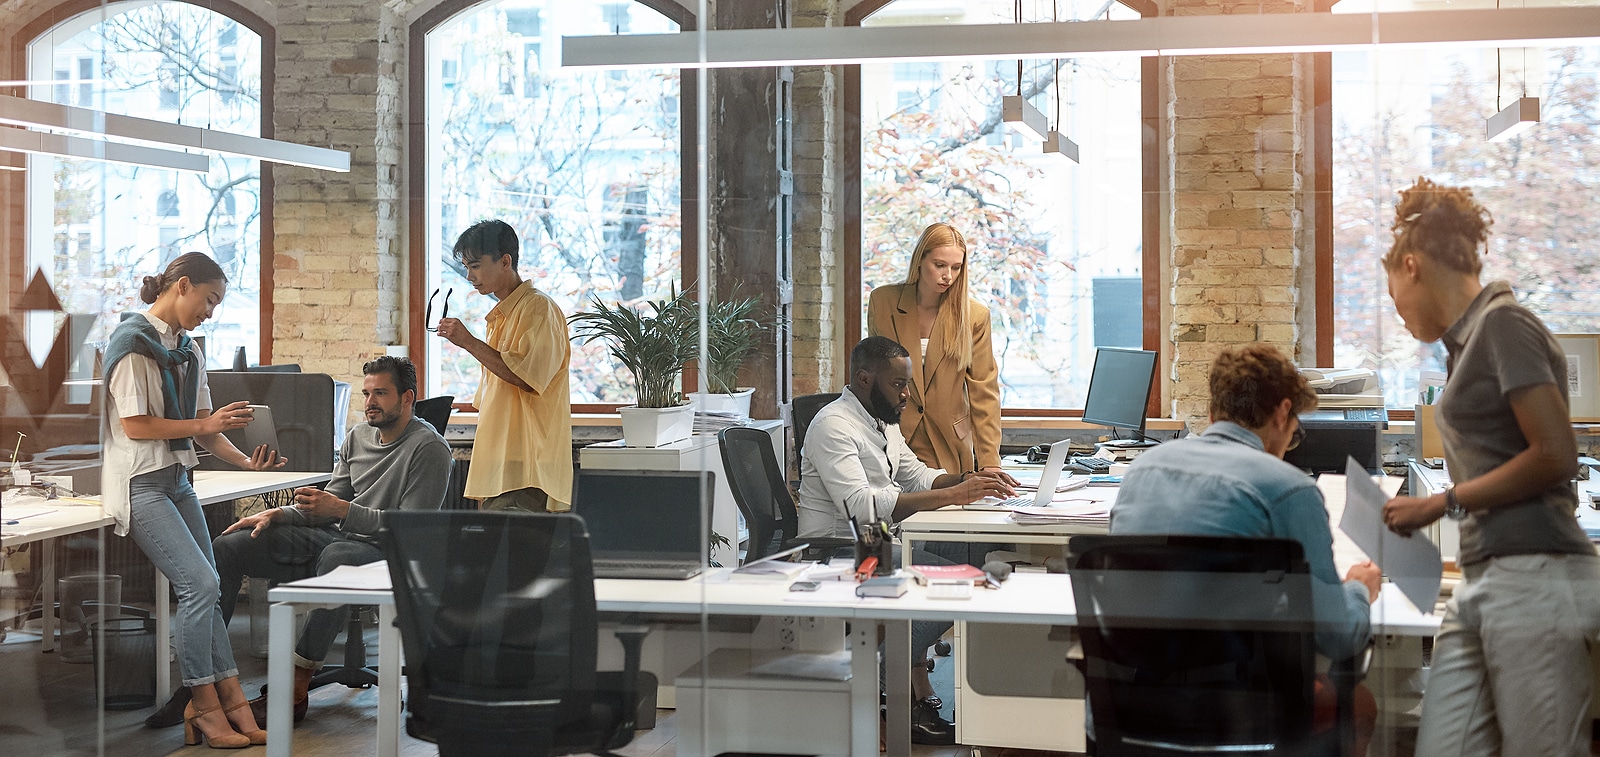 Document-scanning services can streamline workflows at your organization. A group of young employees in a trendy open-concept workspace collaborate.